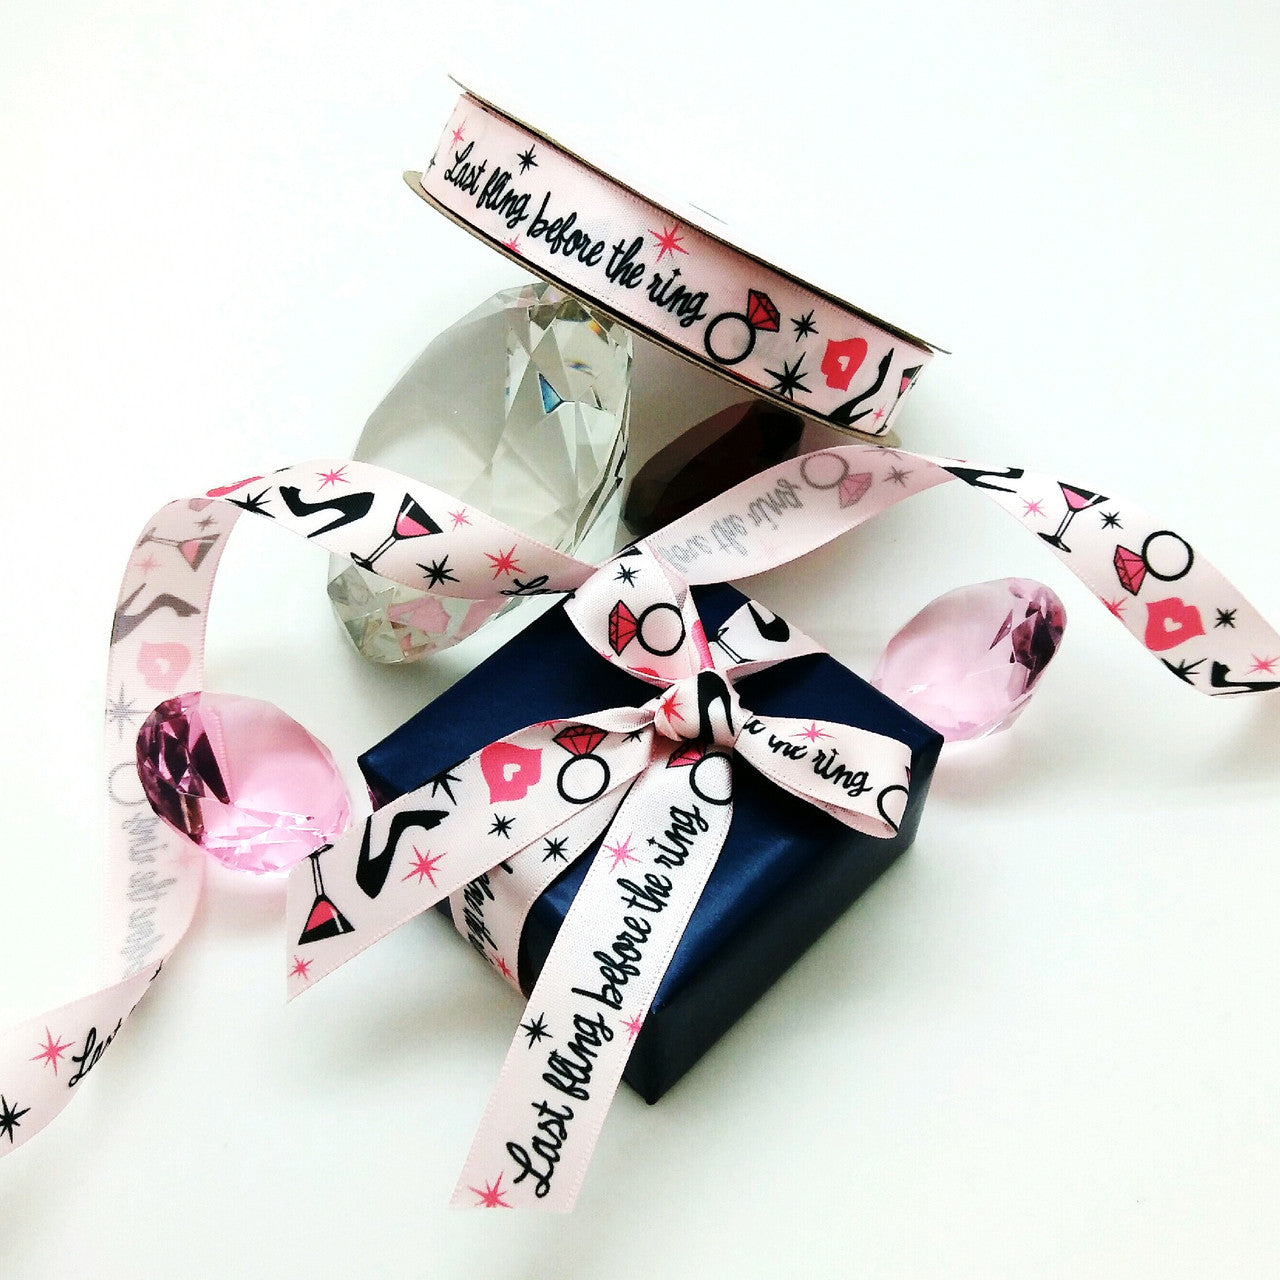 A perfect ribbon for a little thank you gift for the ladies who gave their time and attention to your bachelorette party!